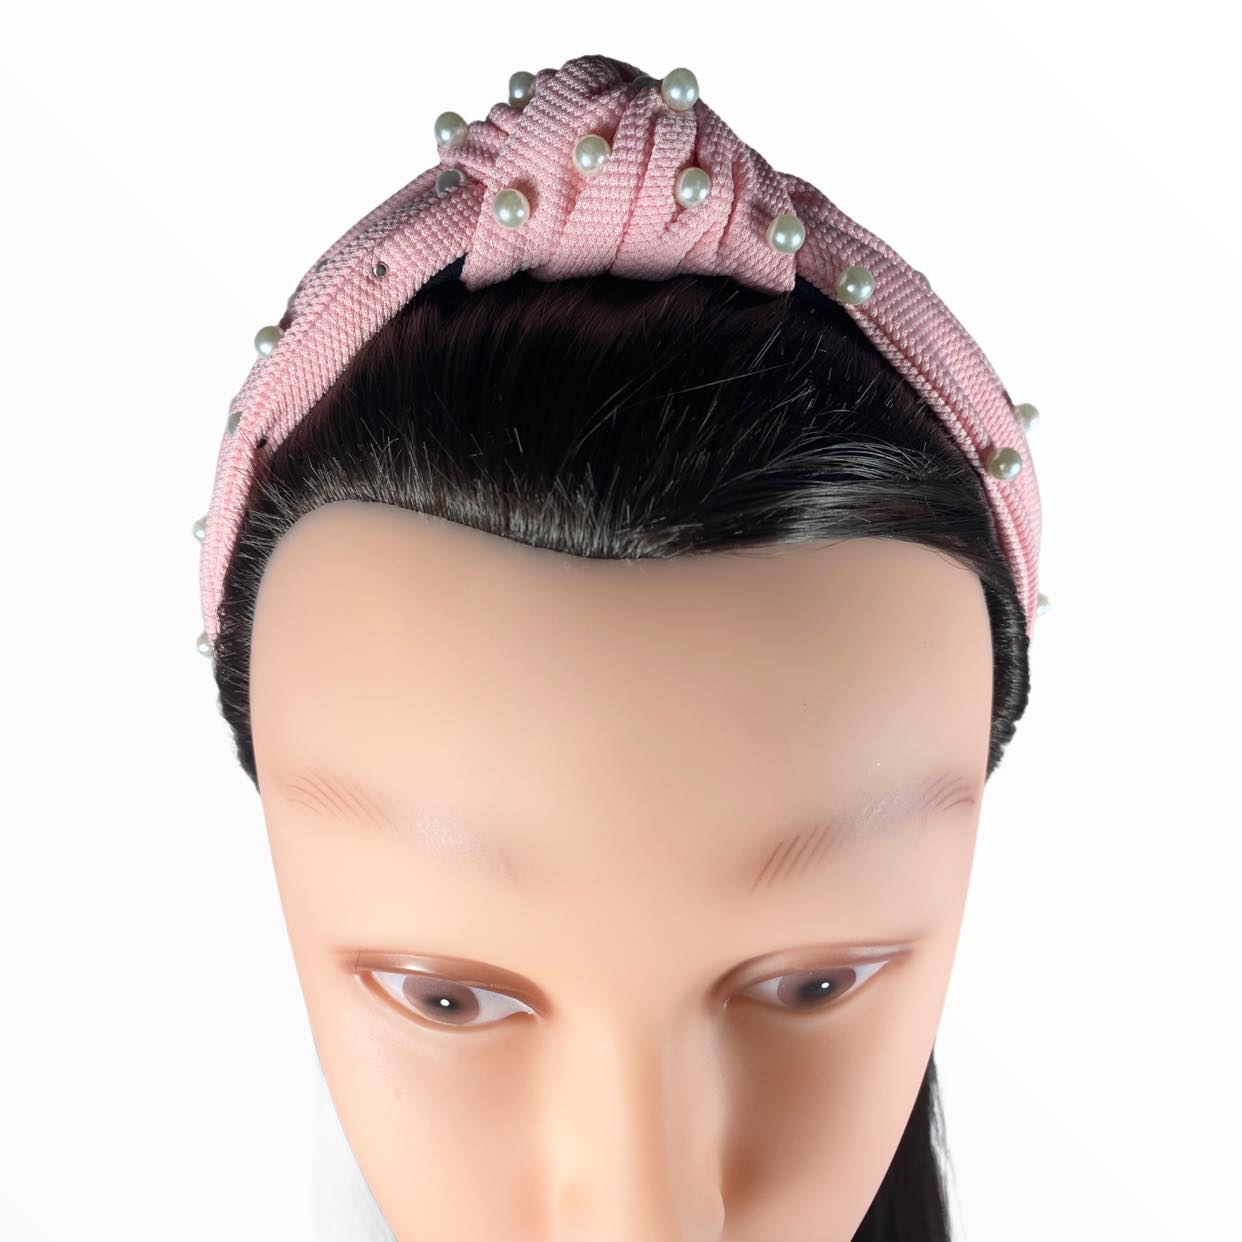 Pink Knotted Headband with Pearls